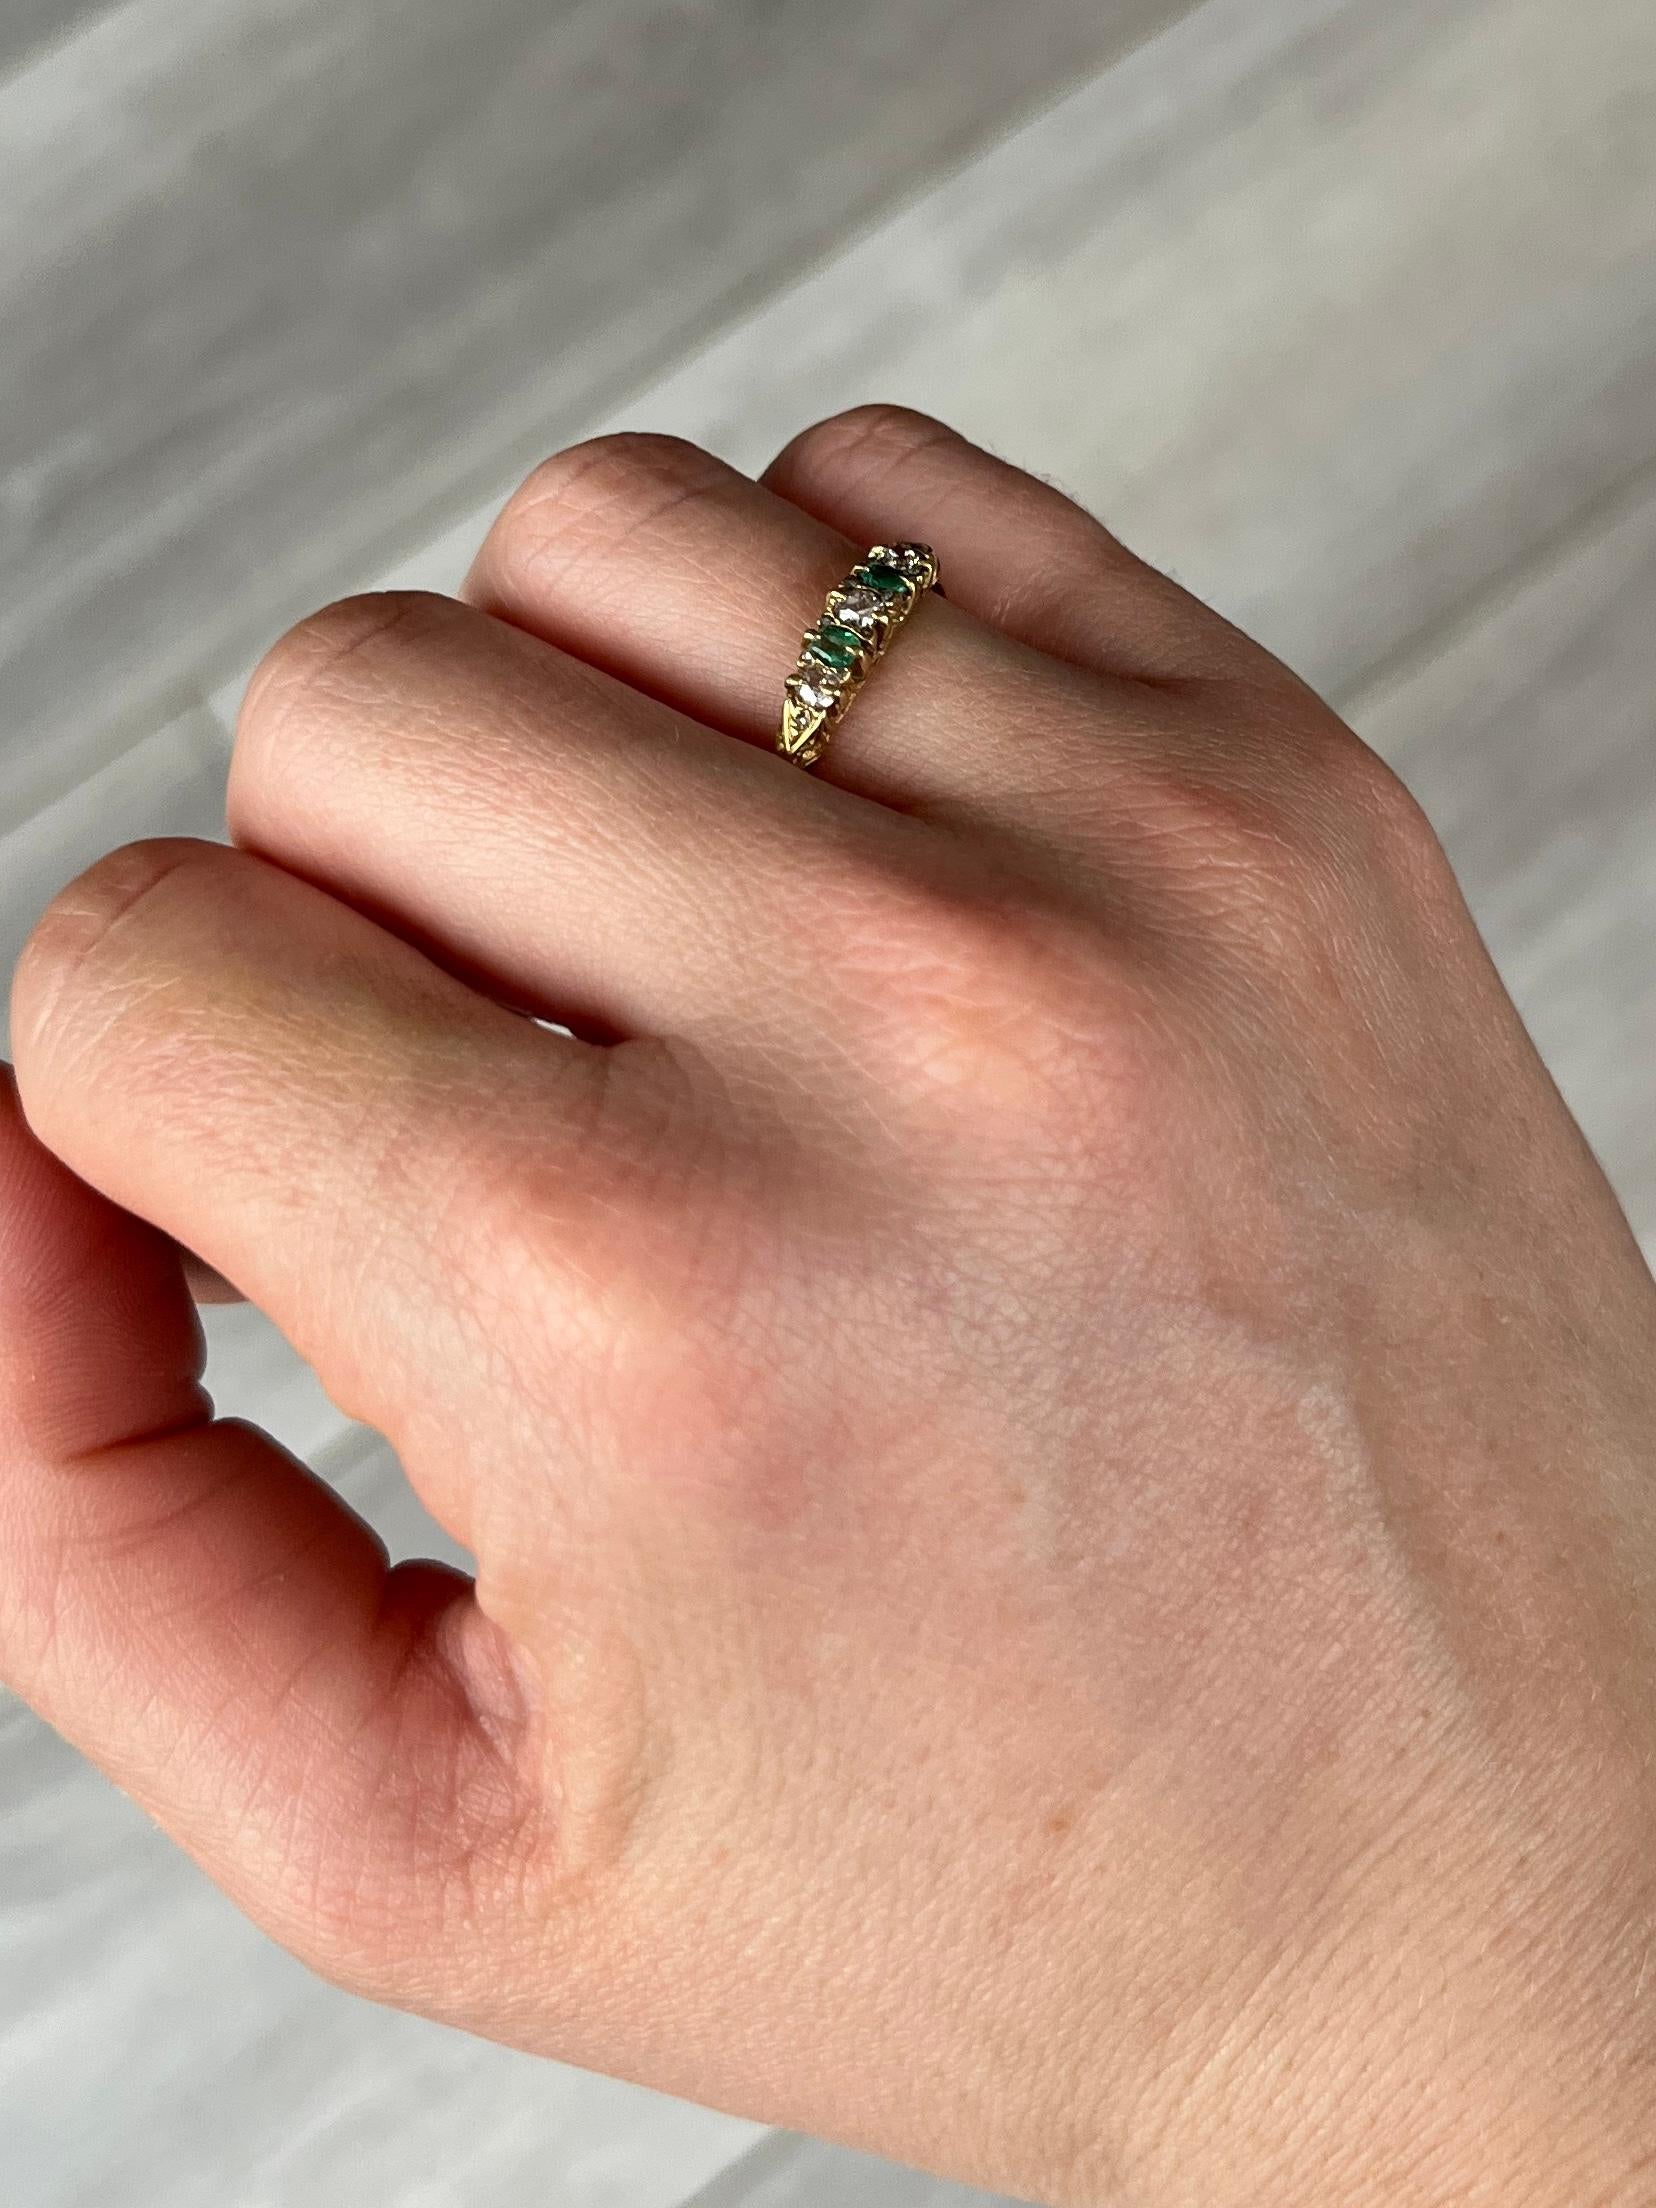 A lovely Edwardian 18 carat gold ring. Emerald total 14pts and diamond total 20pts. 

Ring Size: L or 5 3/4 
Widest Point: 4mm
Height Off Finger: 3.5mm

Weight: 2g

